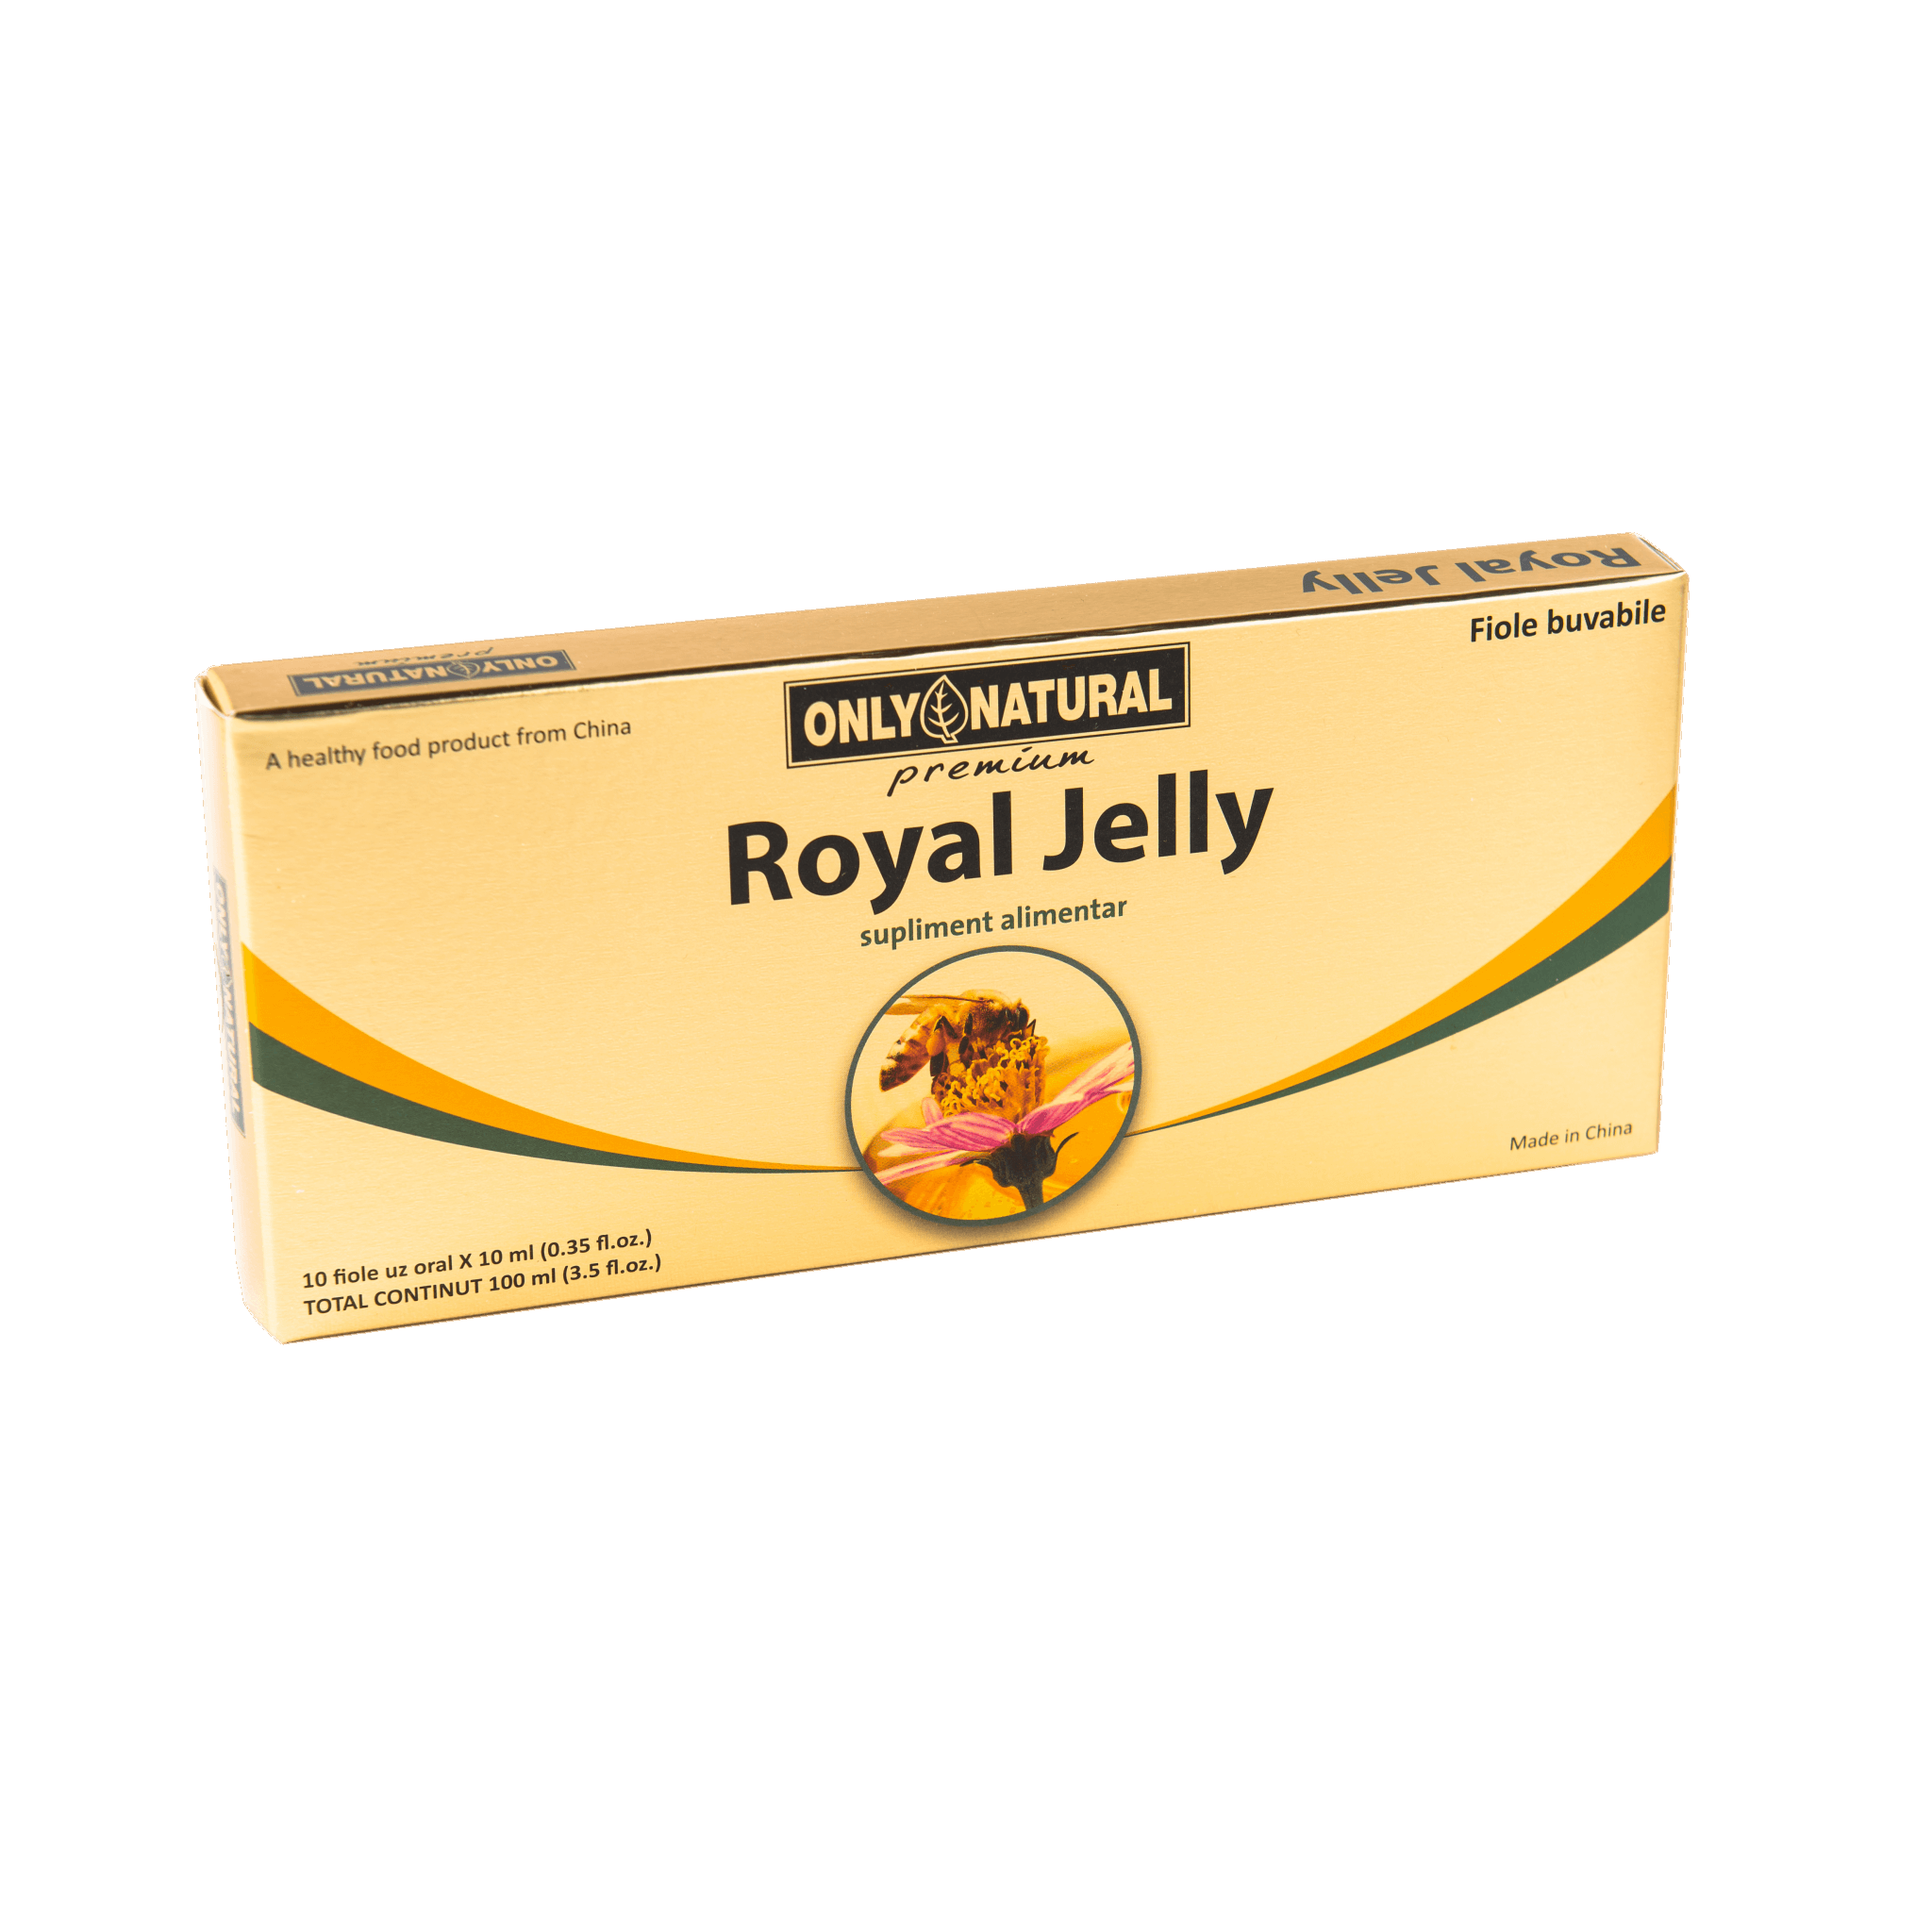 ONLY NATURAL ROYAL JELLY 10 FIOLE X 10ML helpnet imagine noua